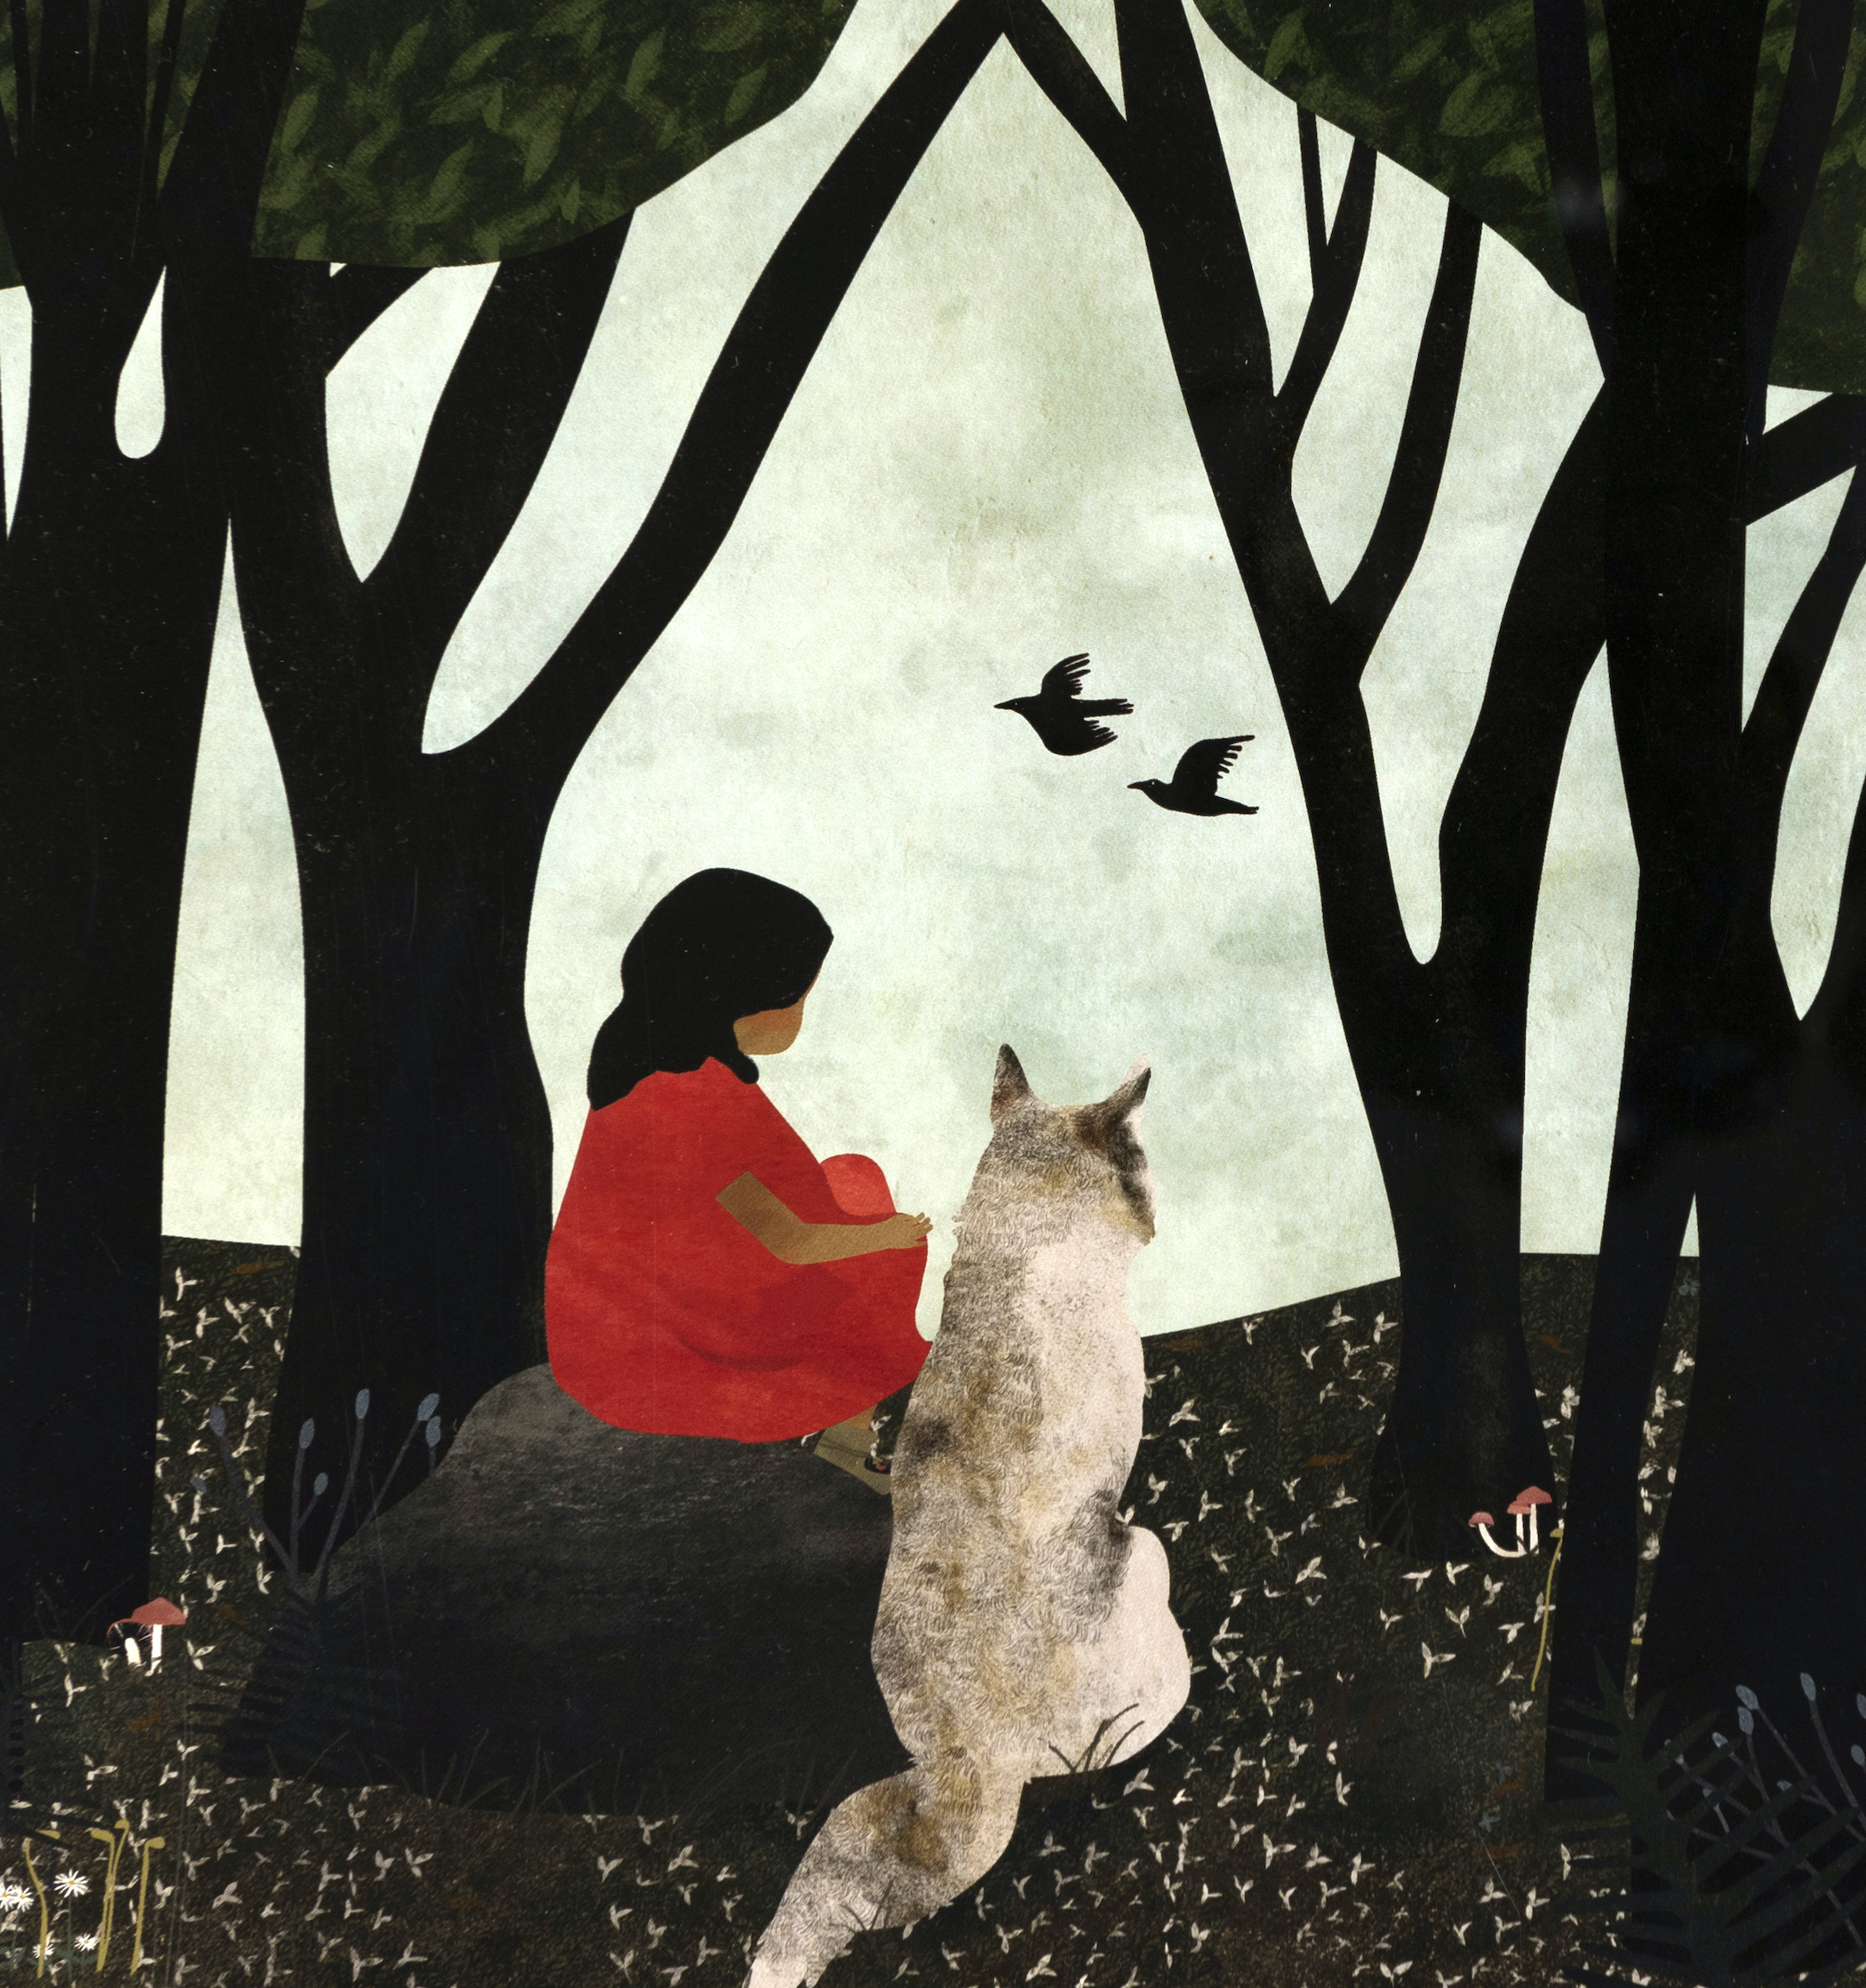 A girl in a red dress sits on a rock next to a wolf, both with their backs turned. Two black birds fly by past the dark forest.